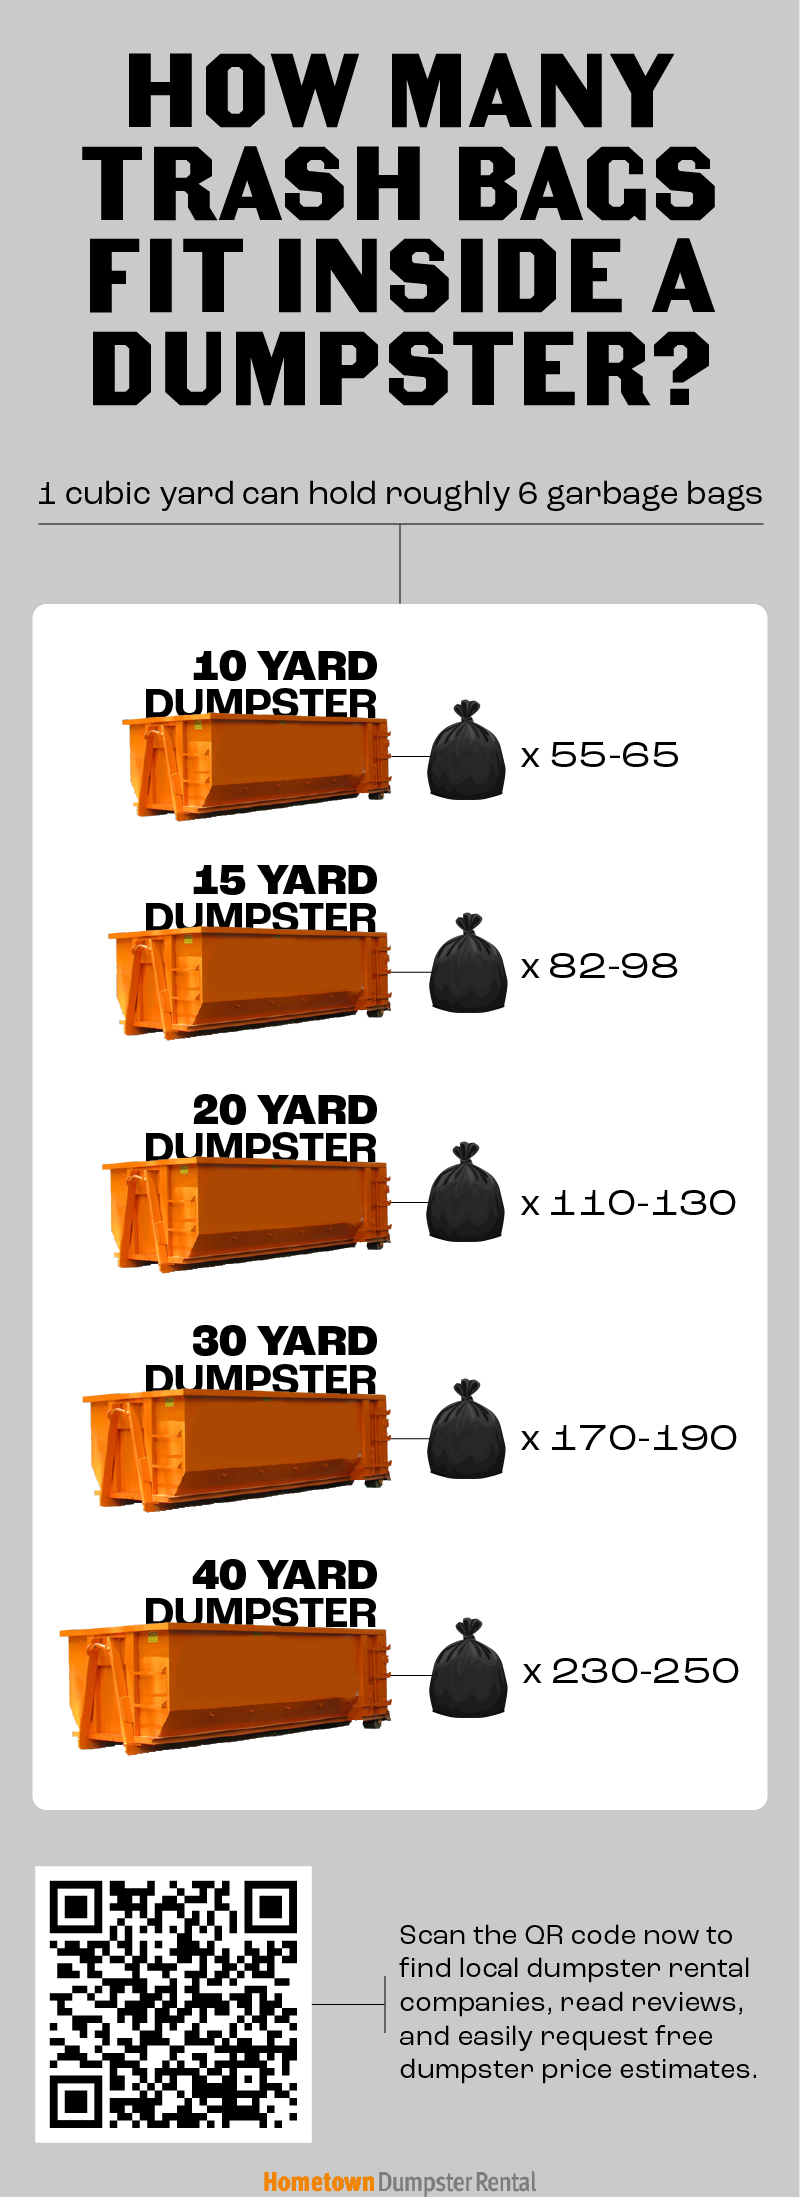 https://www.hometowndumpsterrental.com/static/7ea2568c85953764e9a1857f4c6d79bf/how-many-trash-bags-fit-in-dumpster-infographic.png